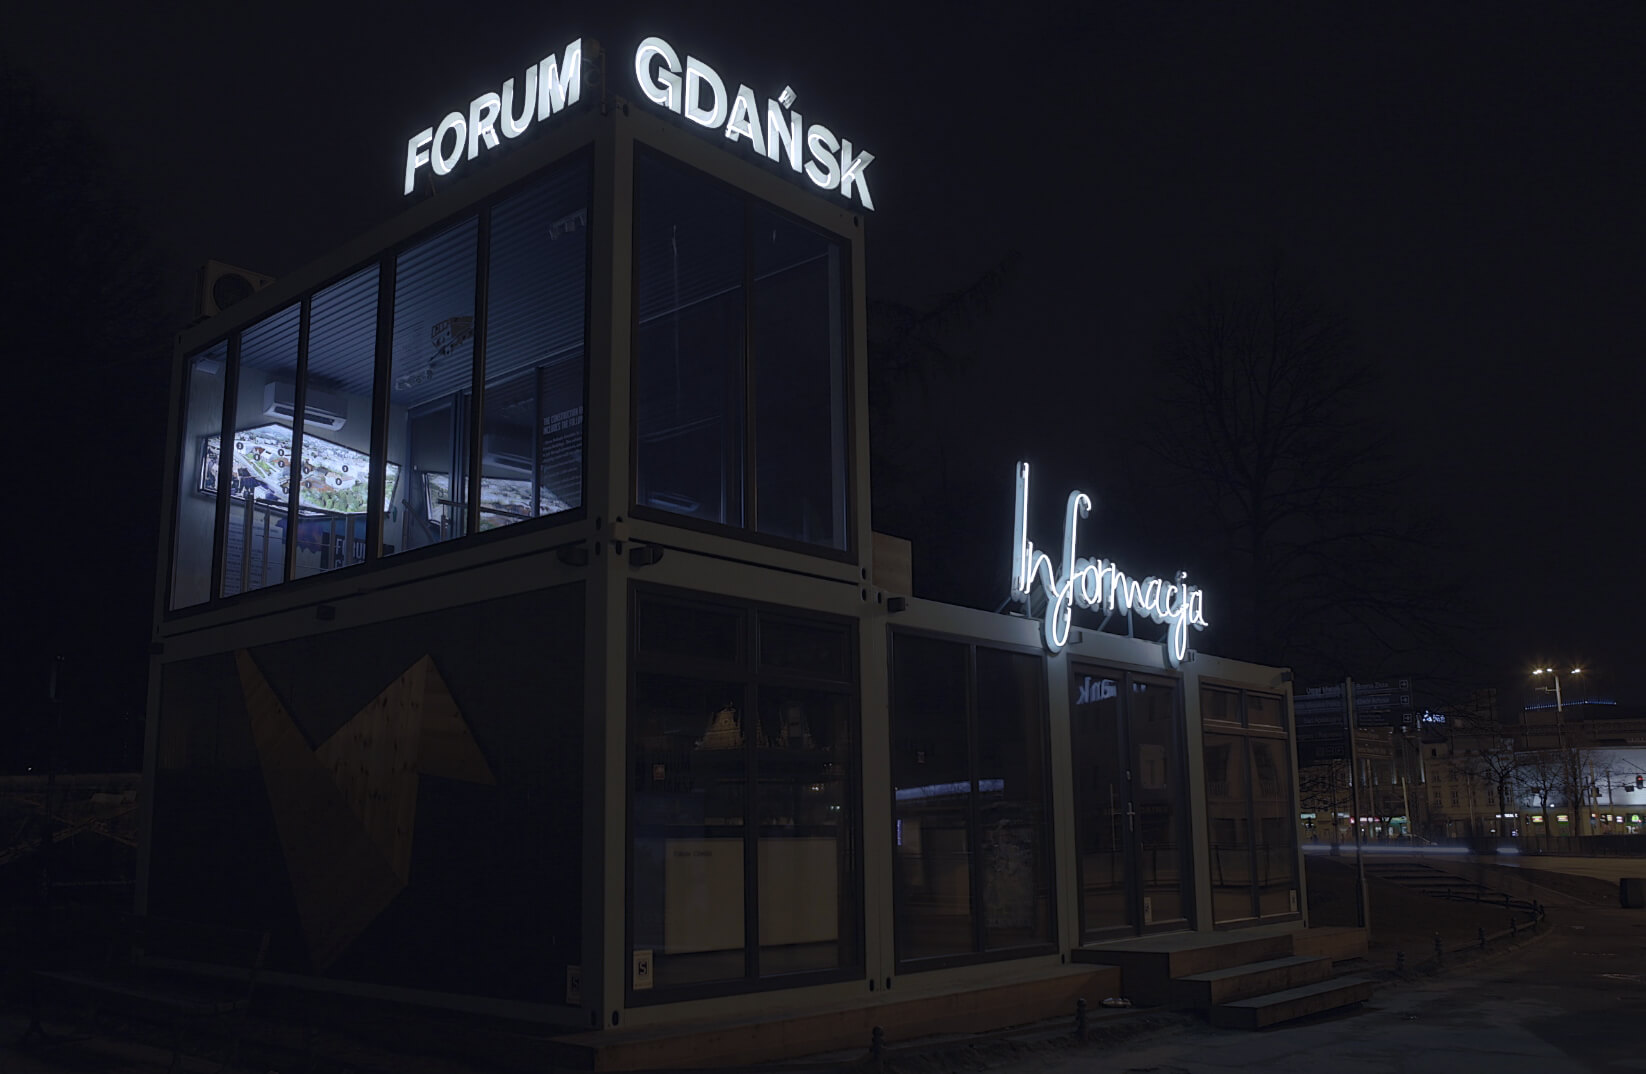 Forum Gdańsk information - Danzig Forum - illuminated letters with a neon sign, mounted on a frame, placed on the roof of the building